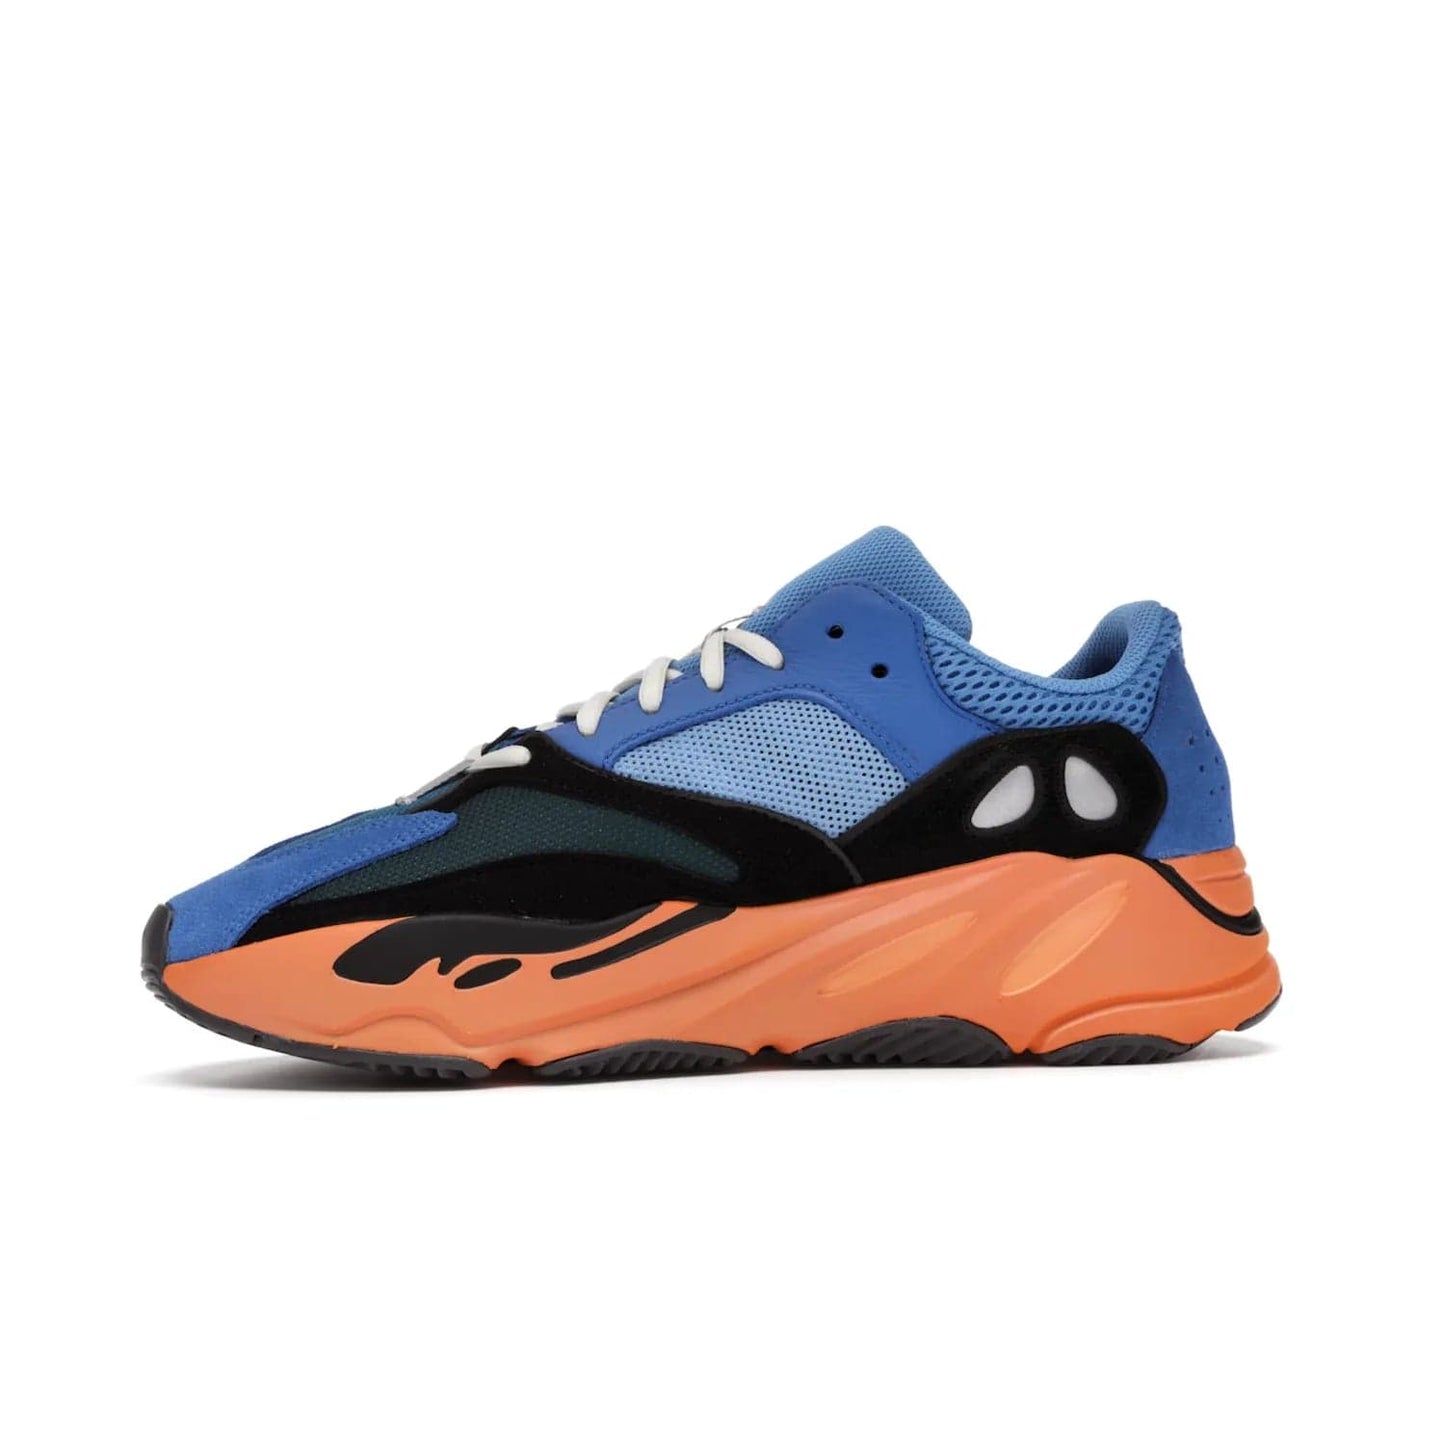 adidas Yeezy Boost 700 Bright Blue - Image 18 - Only at www.BallersClubKickz.com - Iconic sneaker style meets vibrant colour with the adidas Yeezy Boost 700 Bright Blue. Reflective accents, turquoise and teal panels, bright orange midsole and black outsole make for a bold release. April 2021.